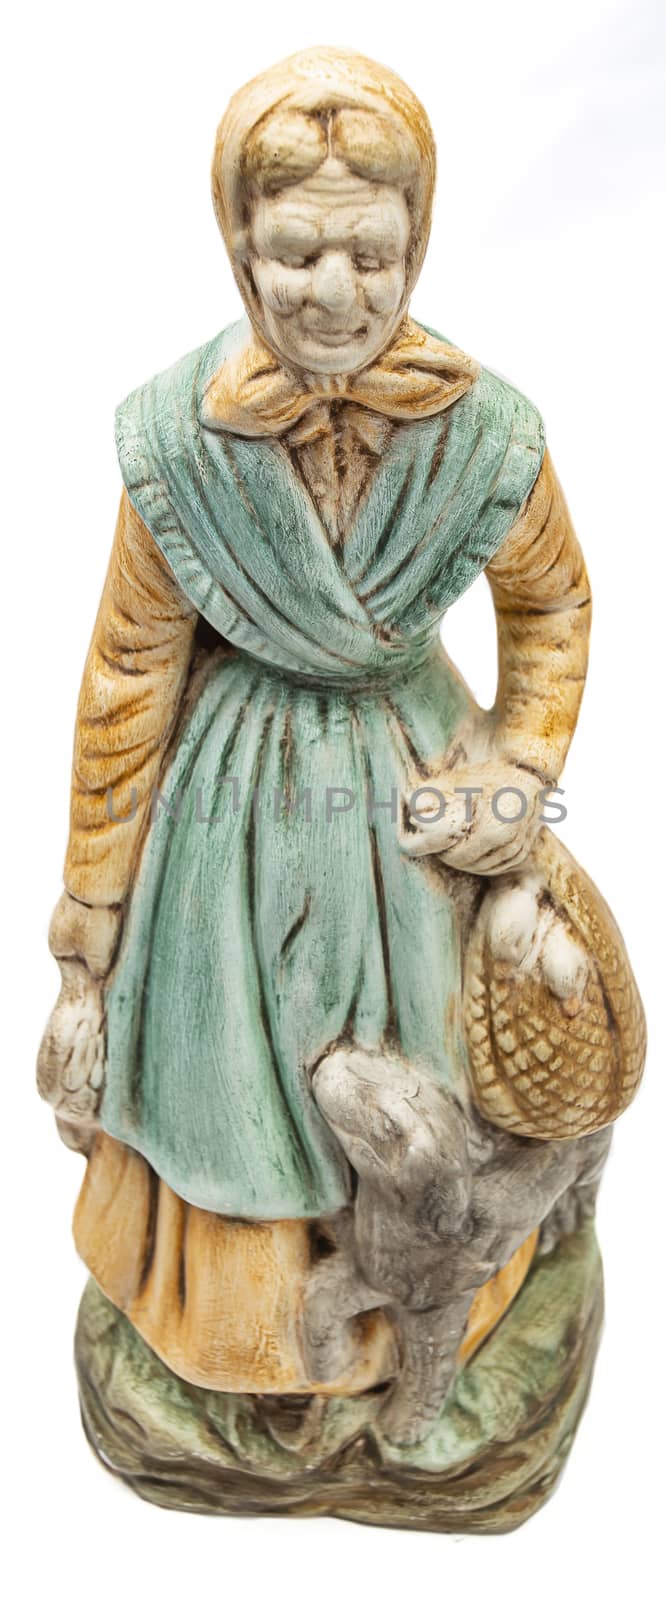 Isolated figurine of an old woman against a white background